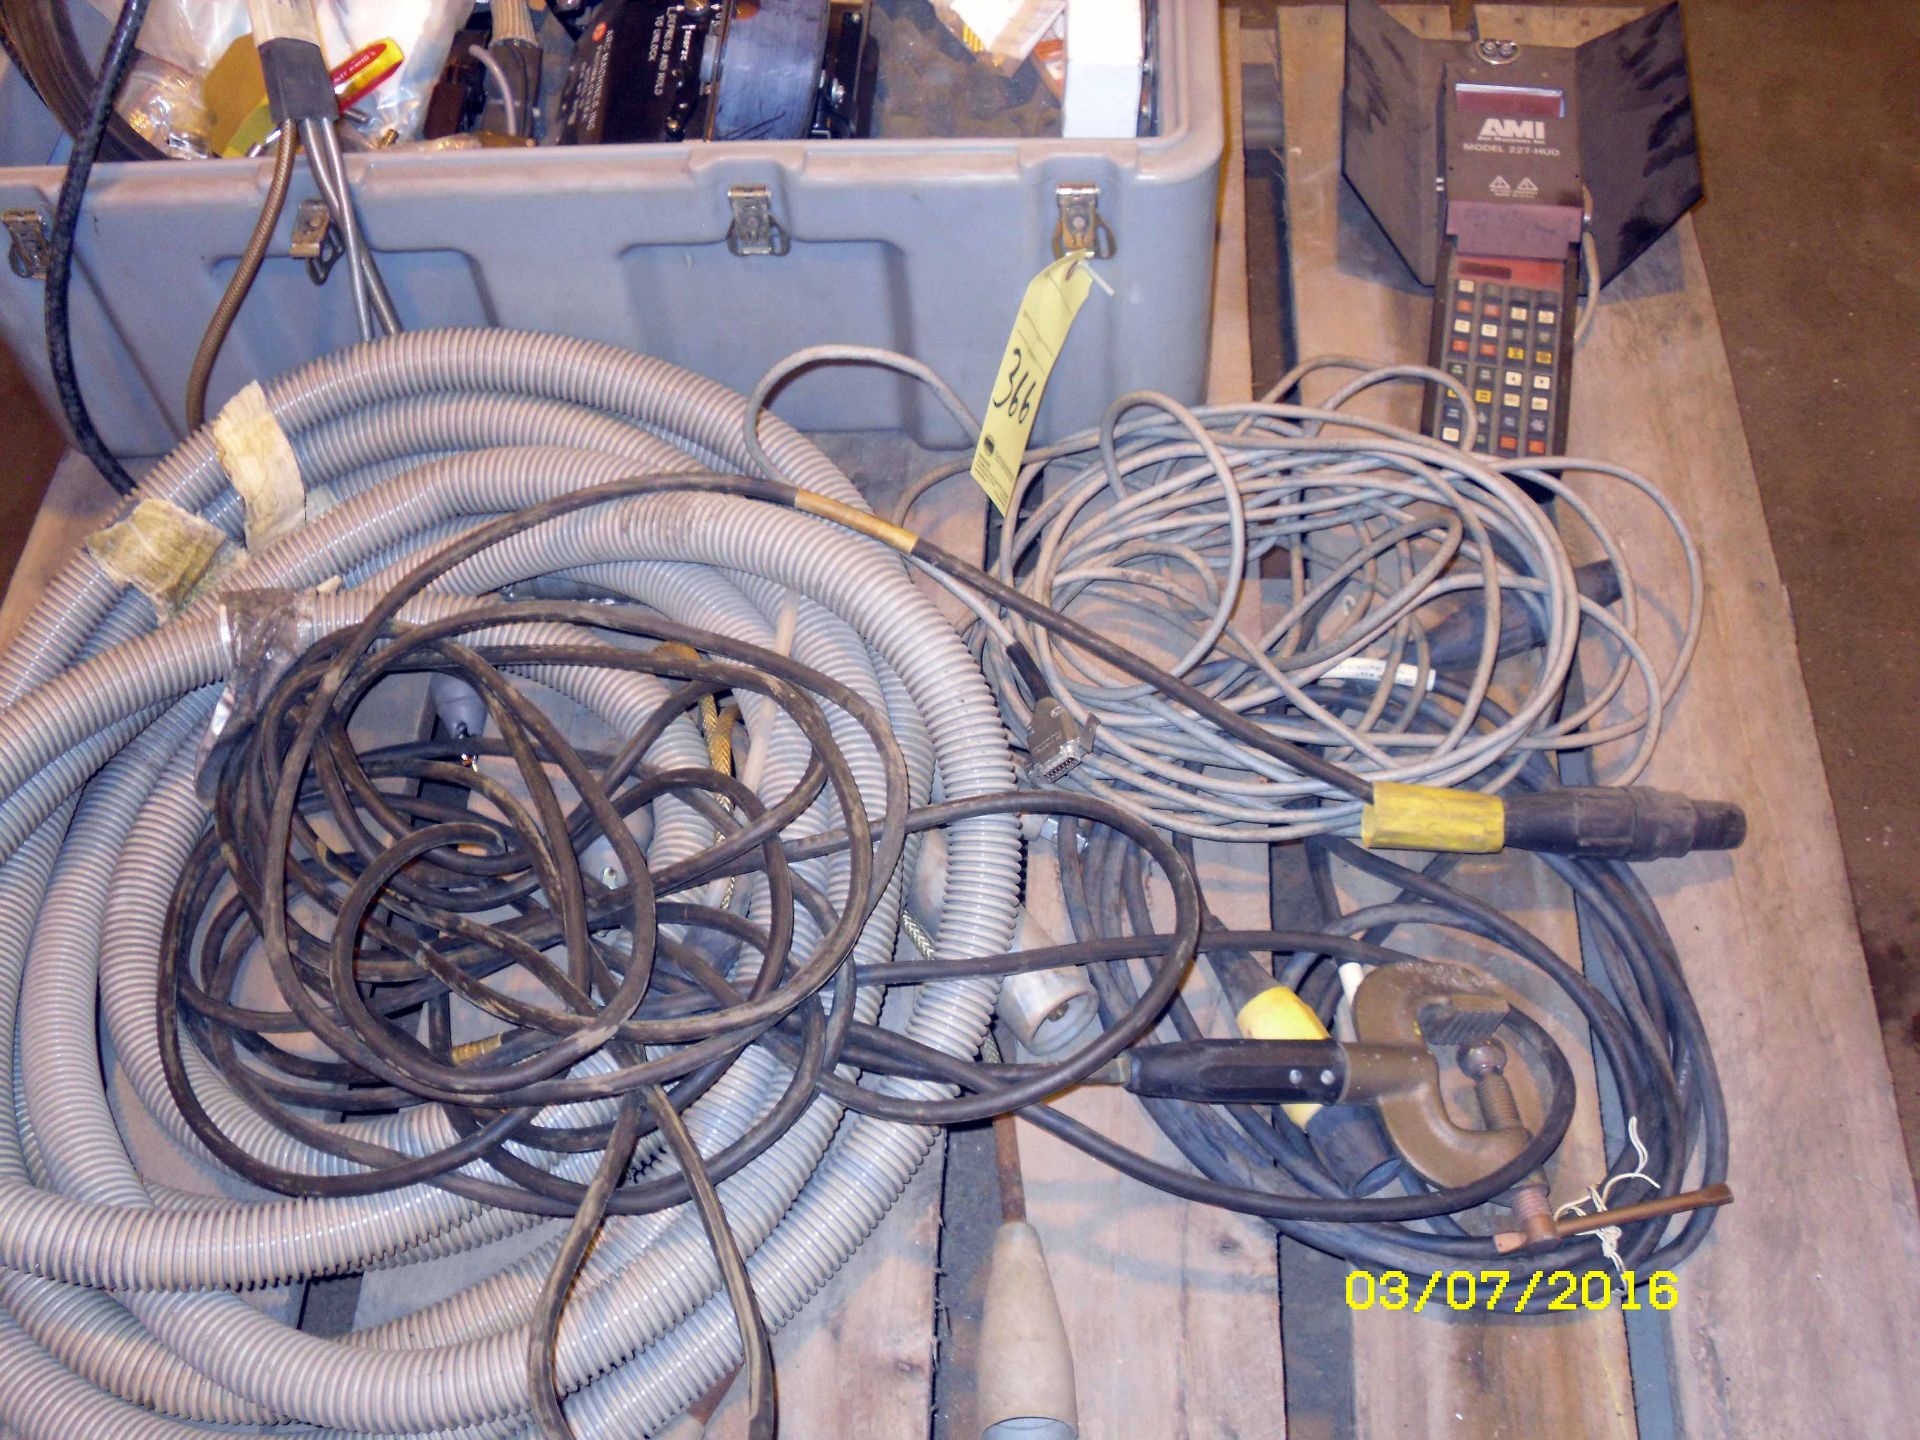 LARGE DIAMETER PIPE WELD HEAD, ARC MACHINES INC. MDL. 15, w/remote pendant, hose, cable & shipping - Image 3 of 3